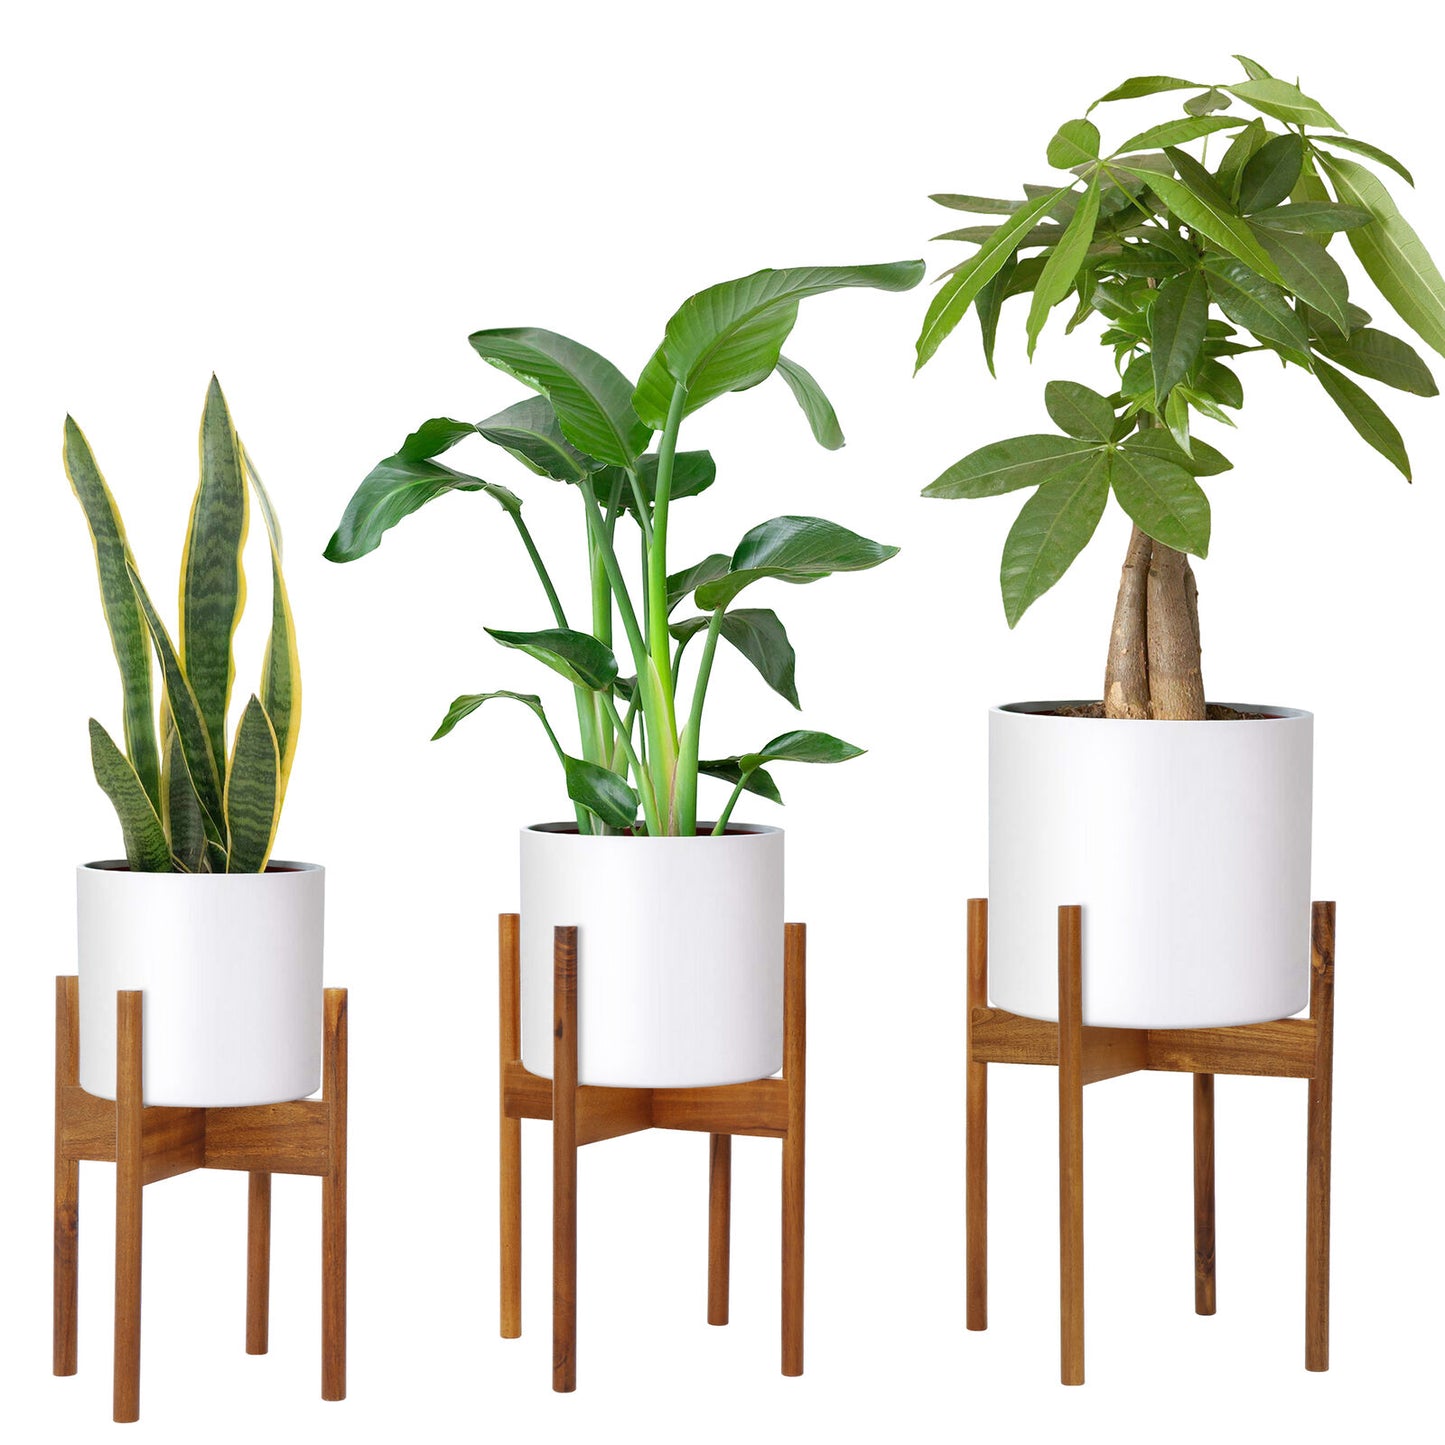 3 Pack Small Medium Large  Plant Stands  Bamboo Wood Holder Garden Yard Decor